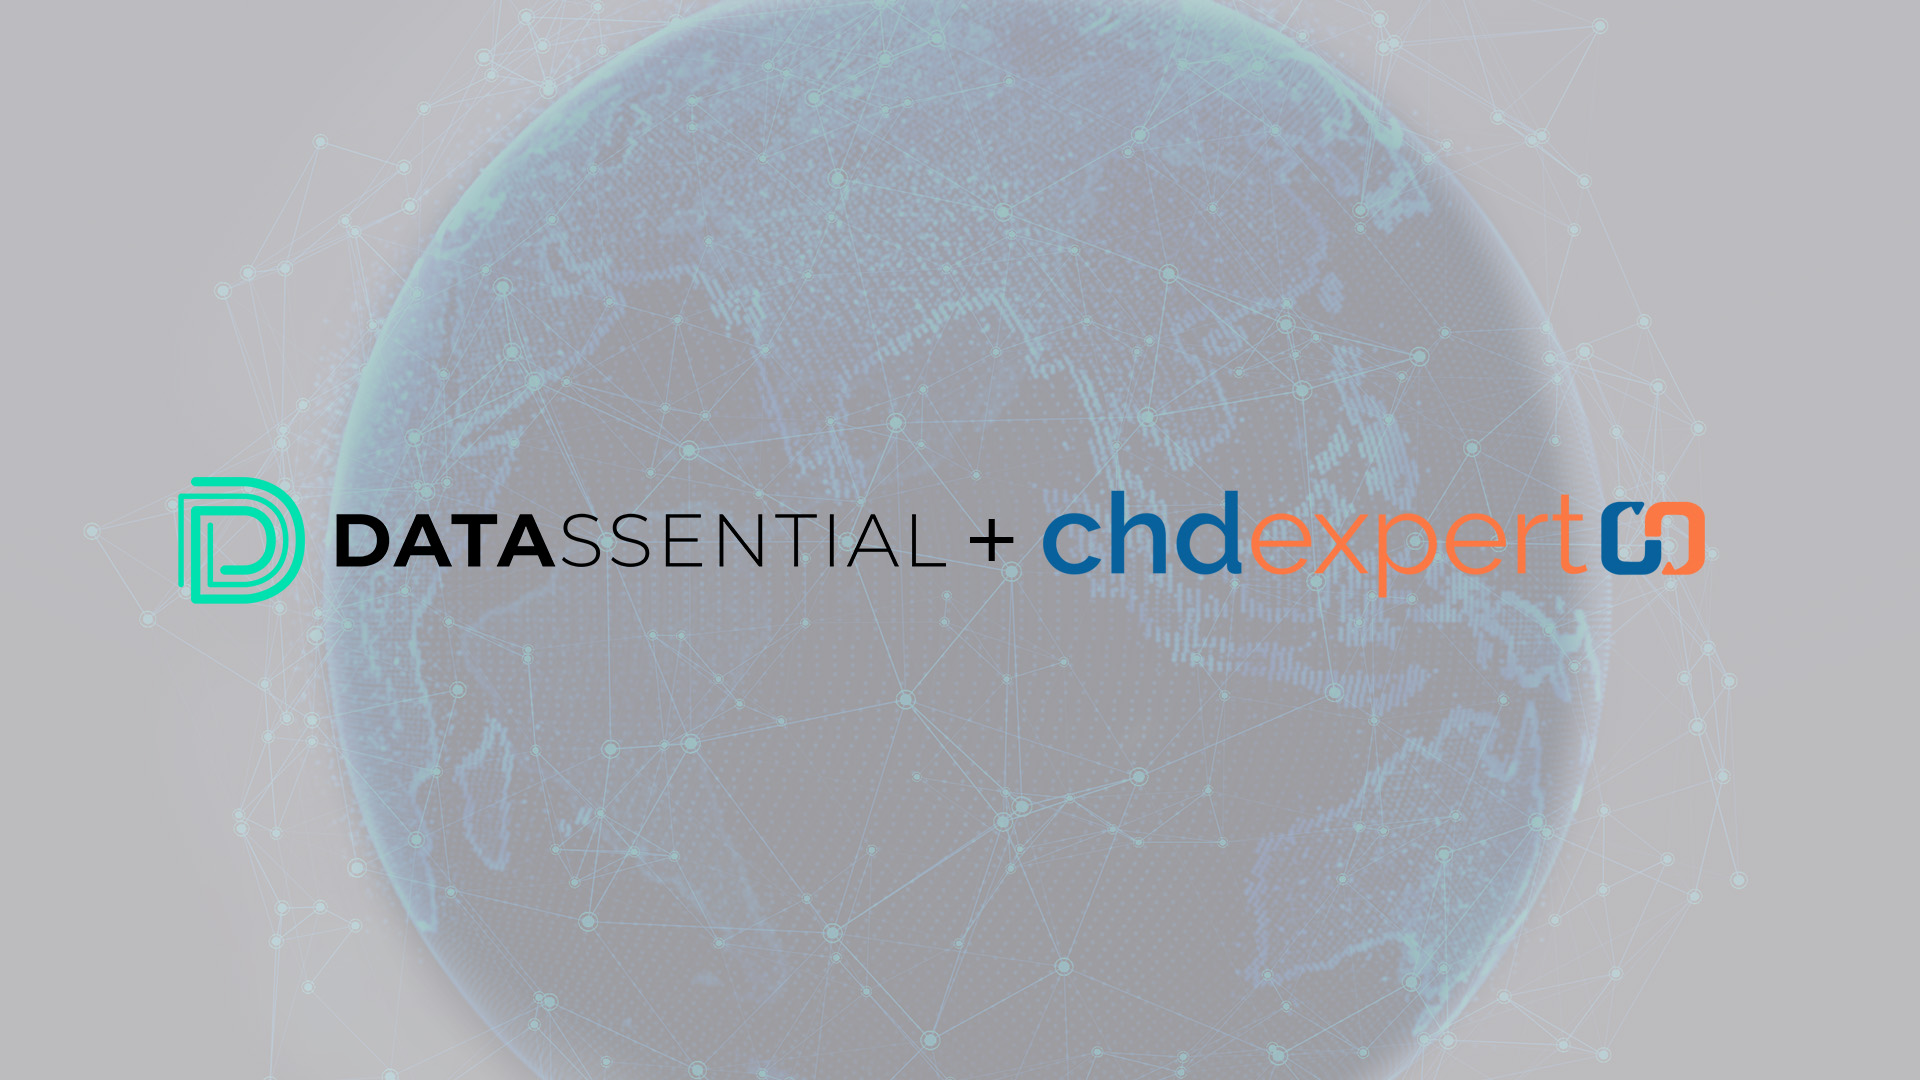 Datassential, the leading food and beverage insights platform, announced its acquisition of CHD Expert, a global provider of foodservice operator data.